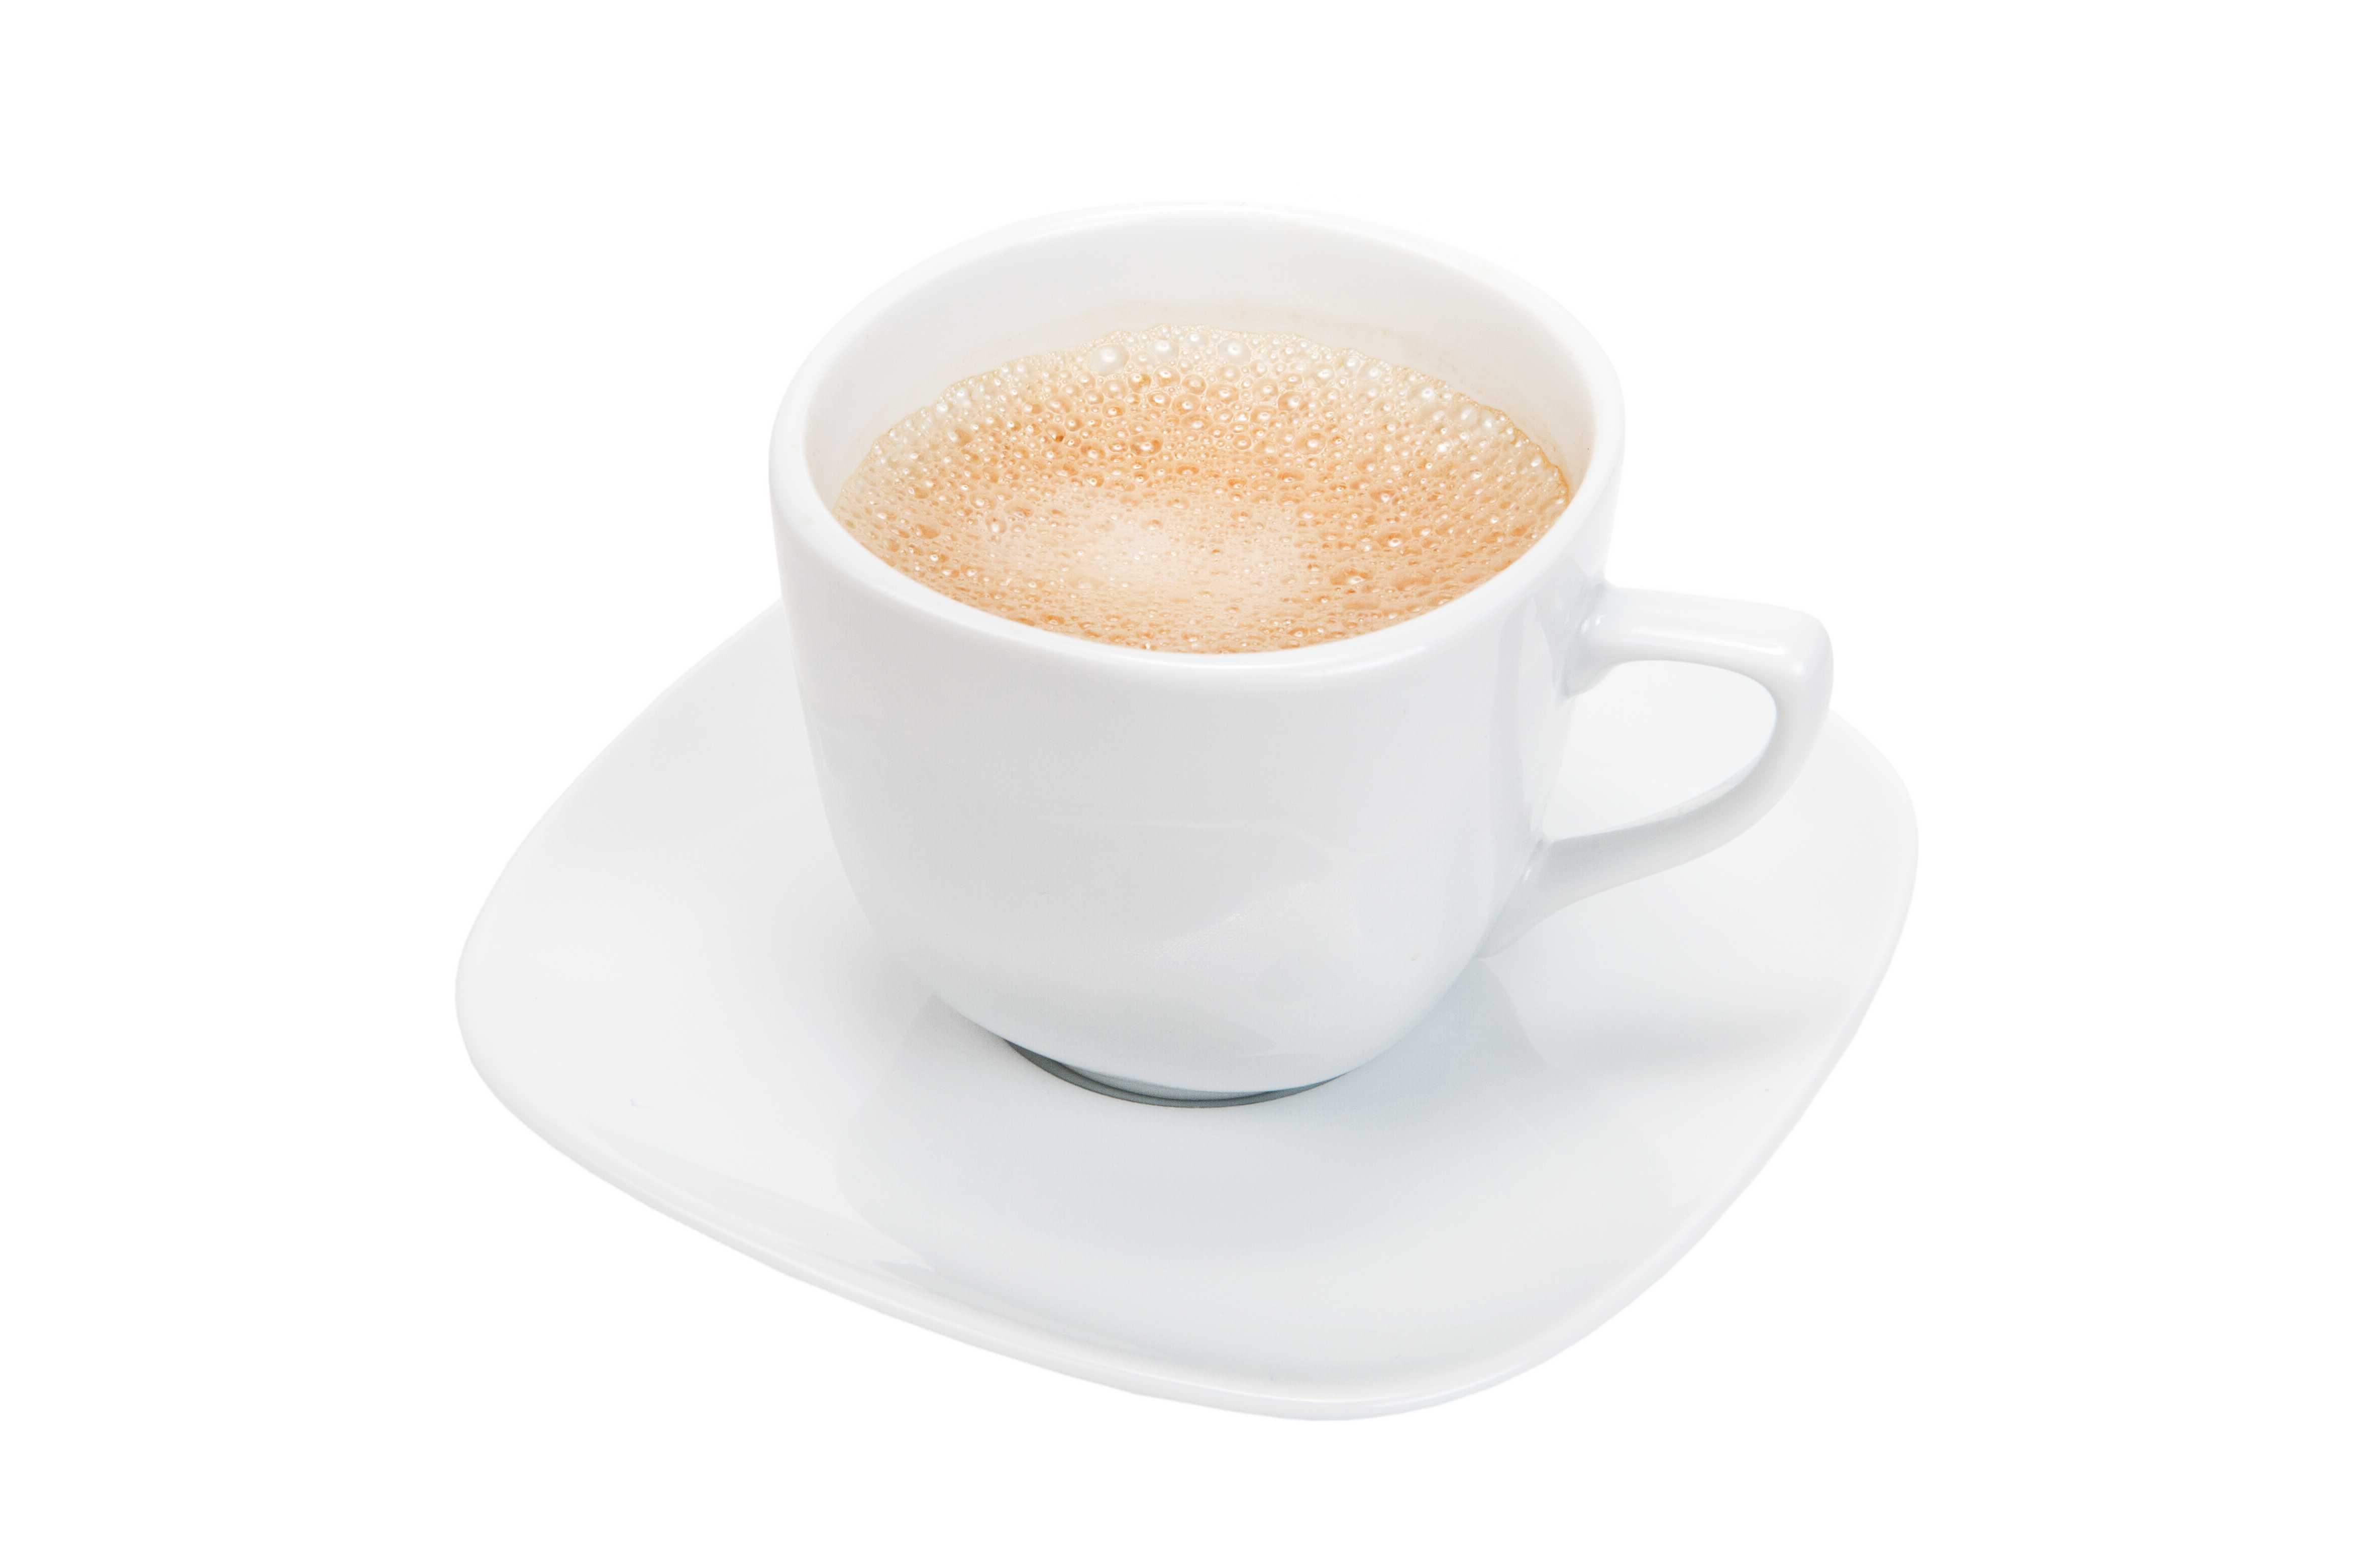 Cappuccino PNG image free Download